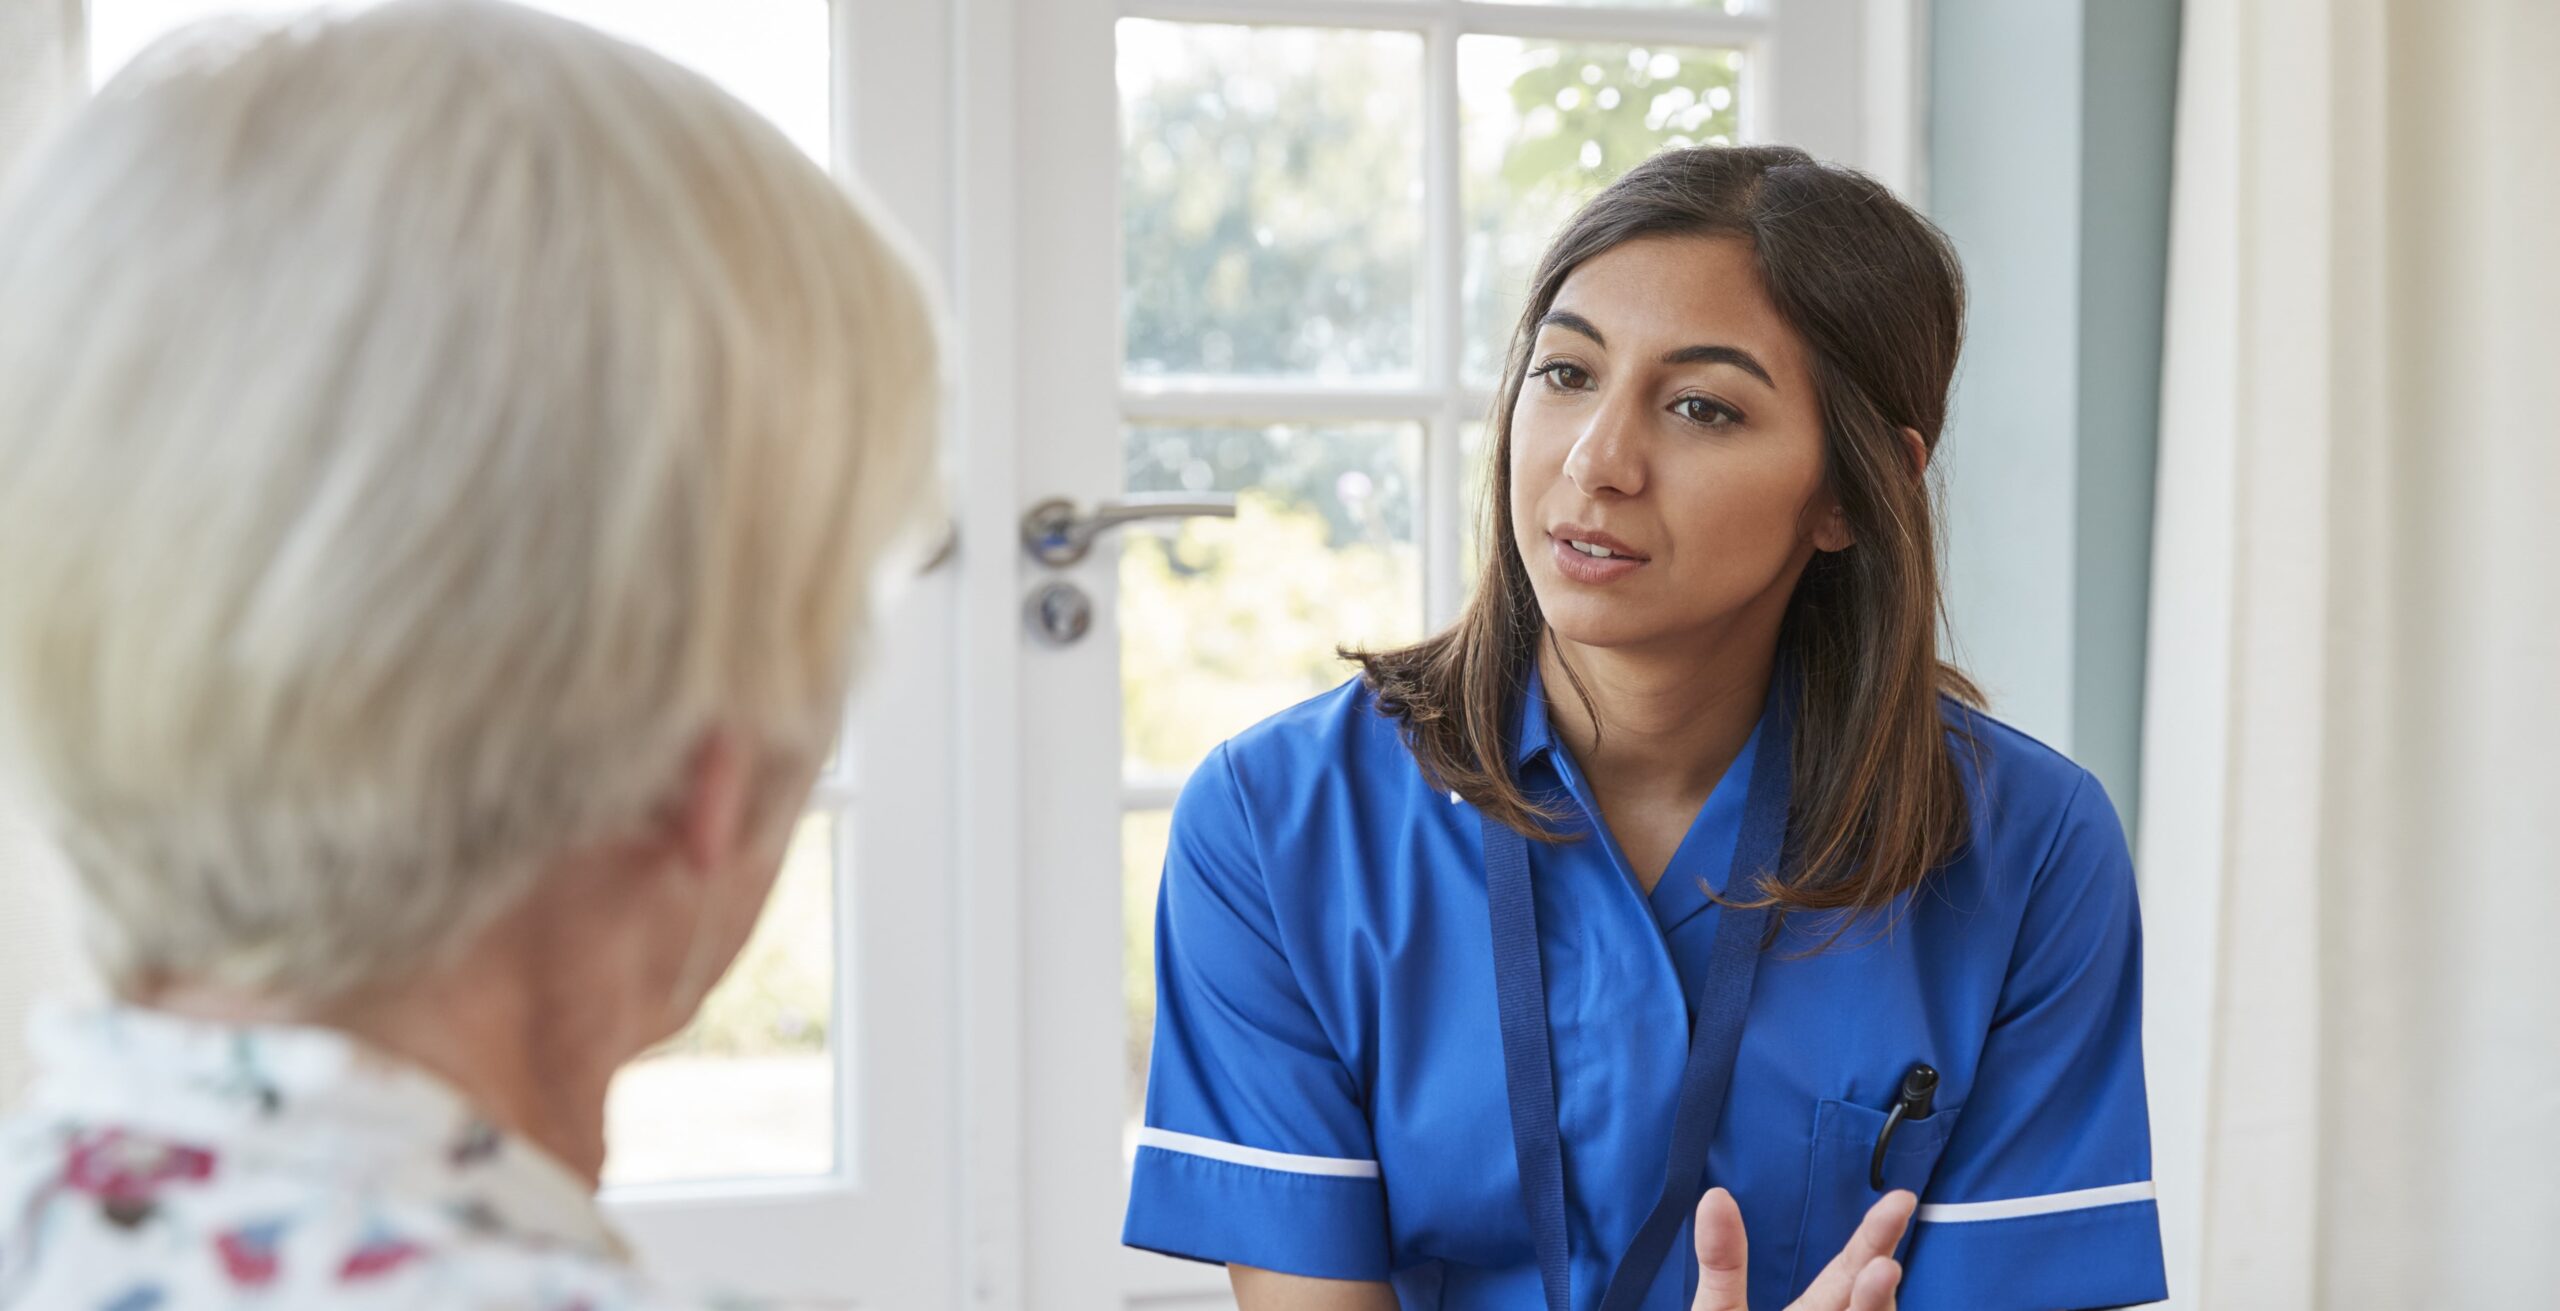 Female domiciliary care service worker speaking with a female Senior